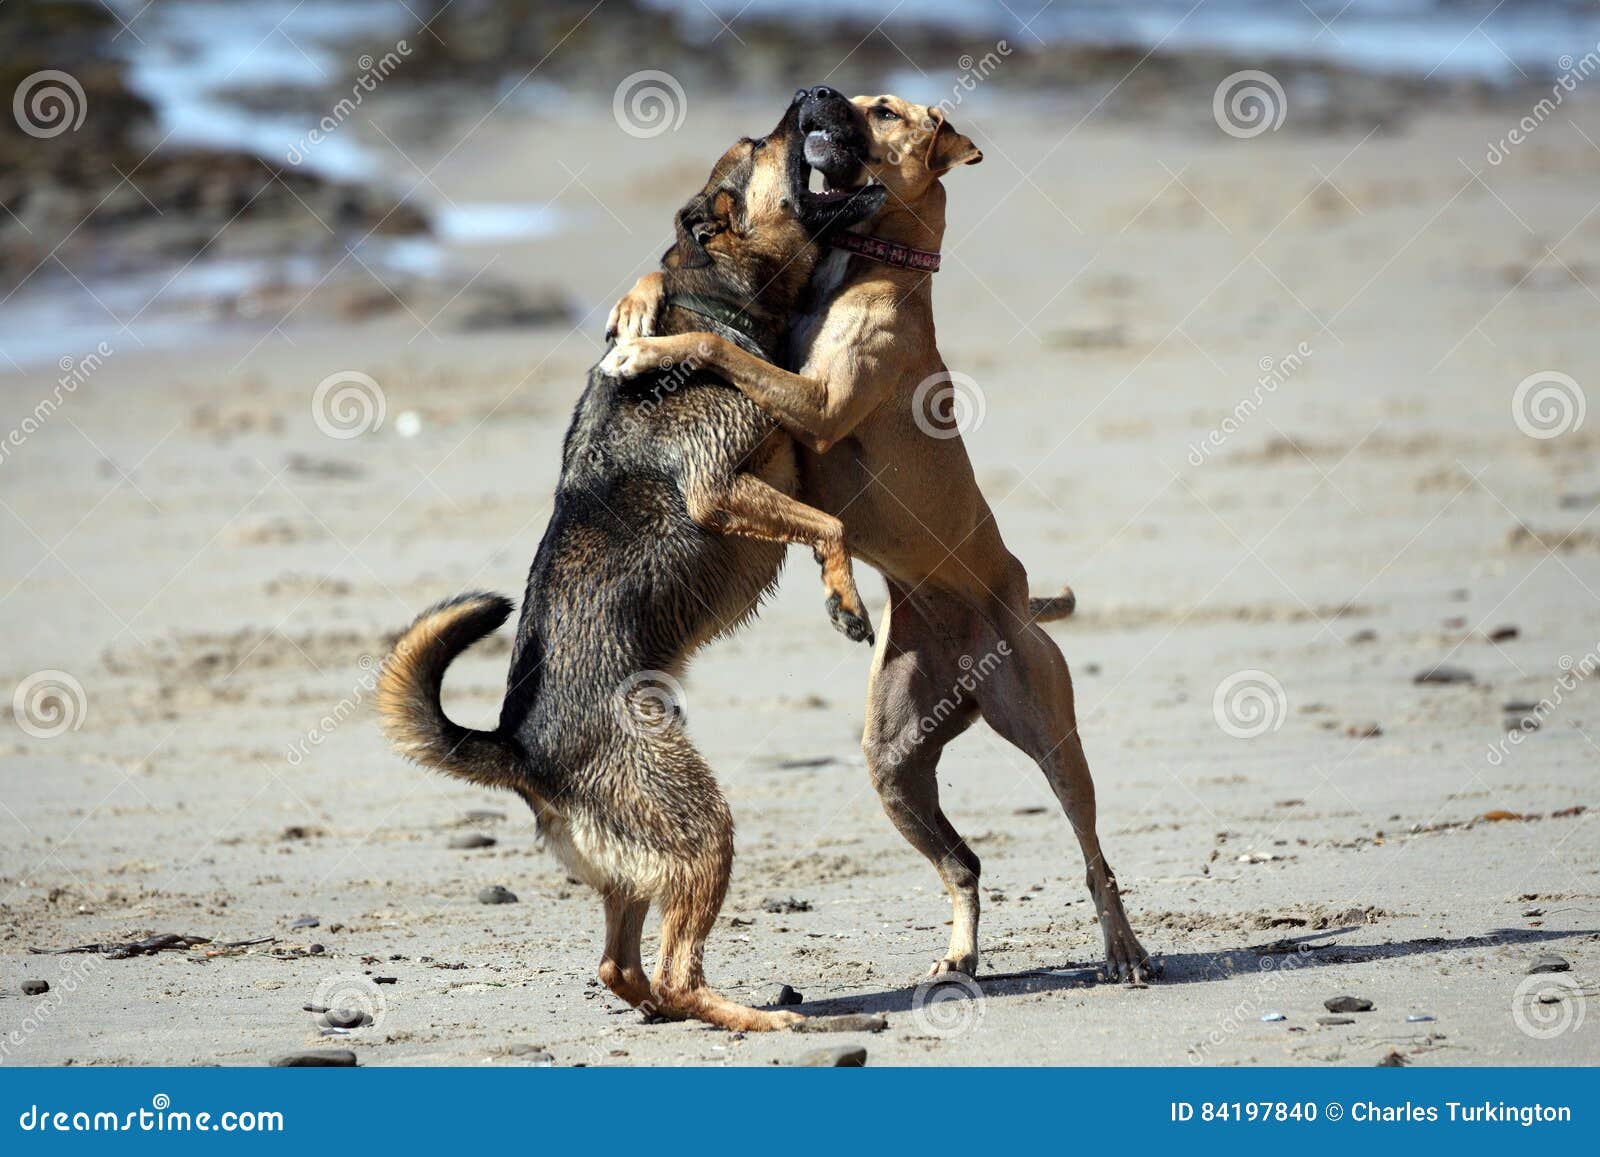 is it ok for dogs to play rough with each other